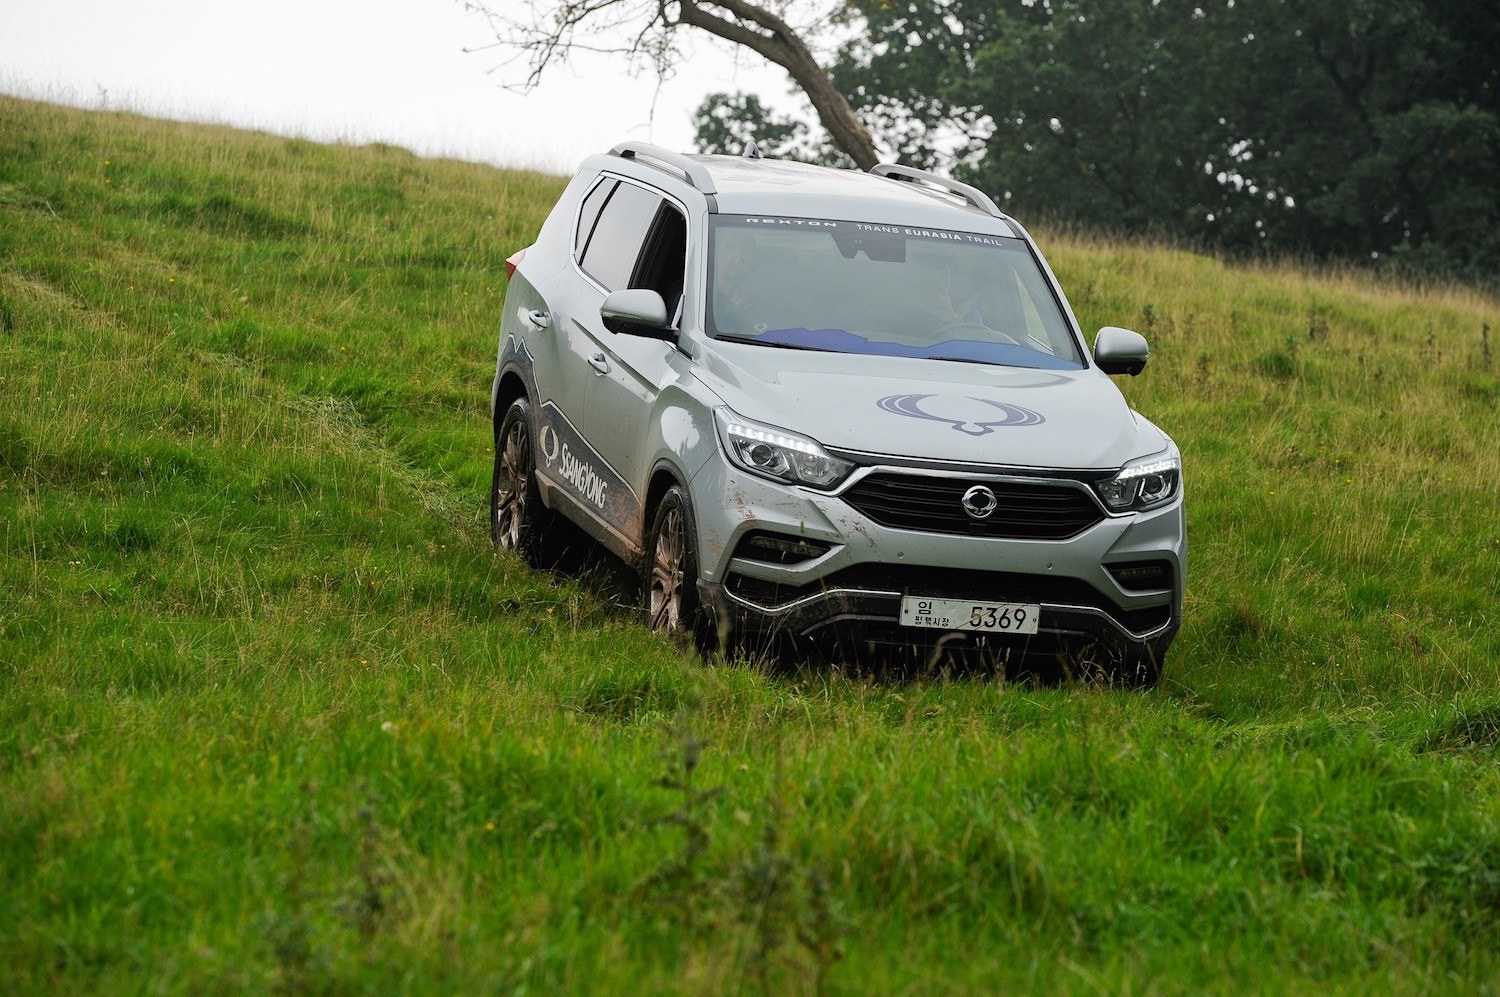 Tom Scanlan reviews the All-New SsangYong Rexton Ultimate 4×4 for Drive 14